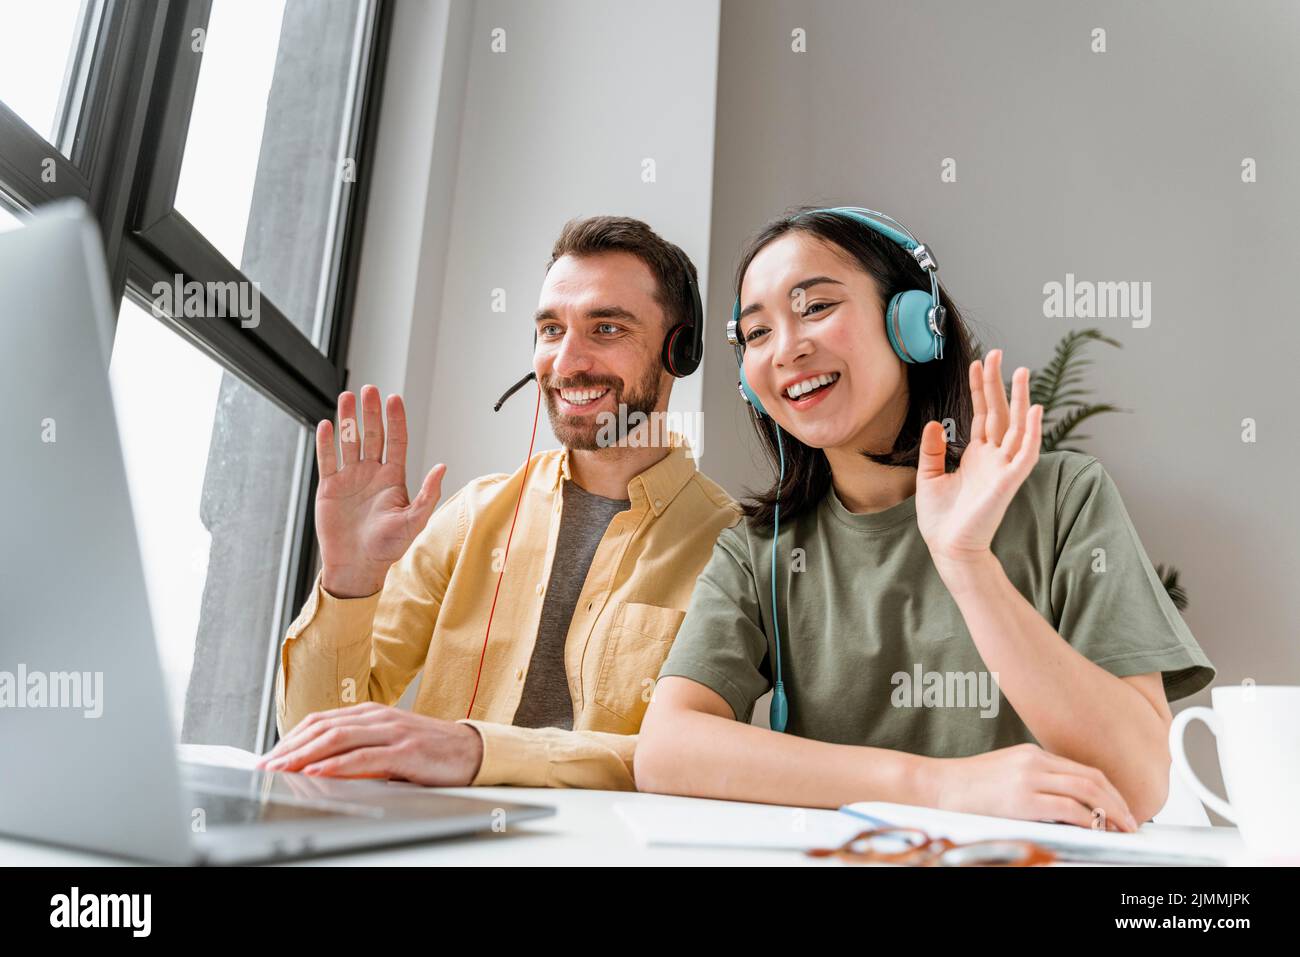 Friends attending online classes together Stock Photo